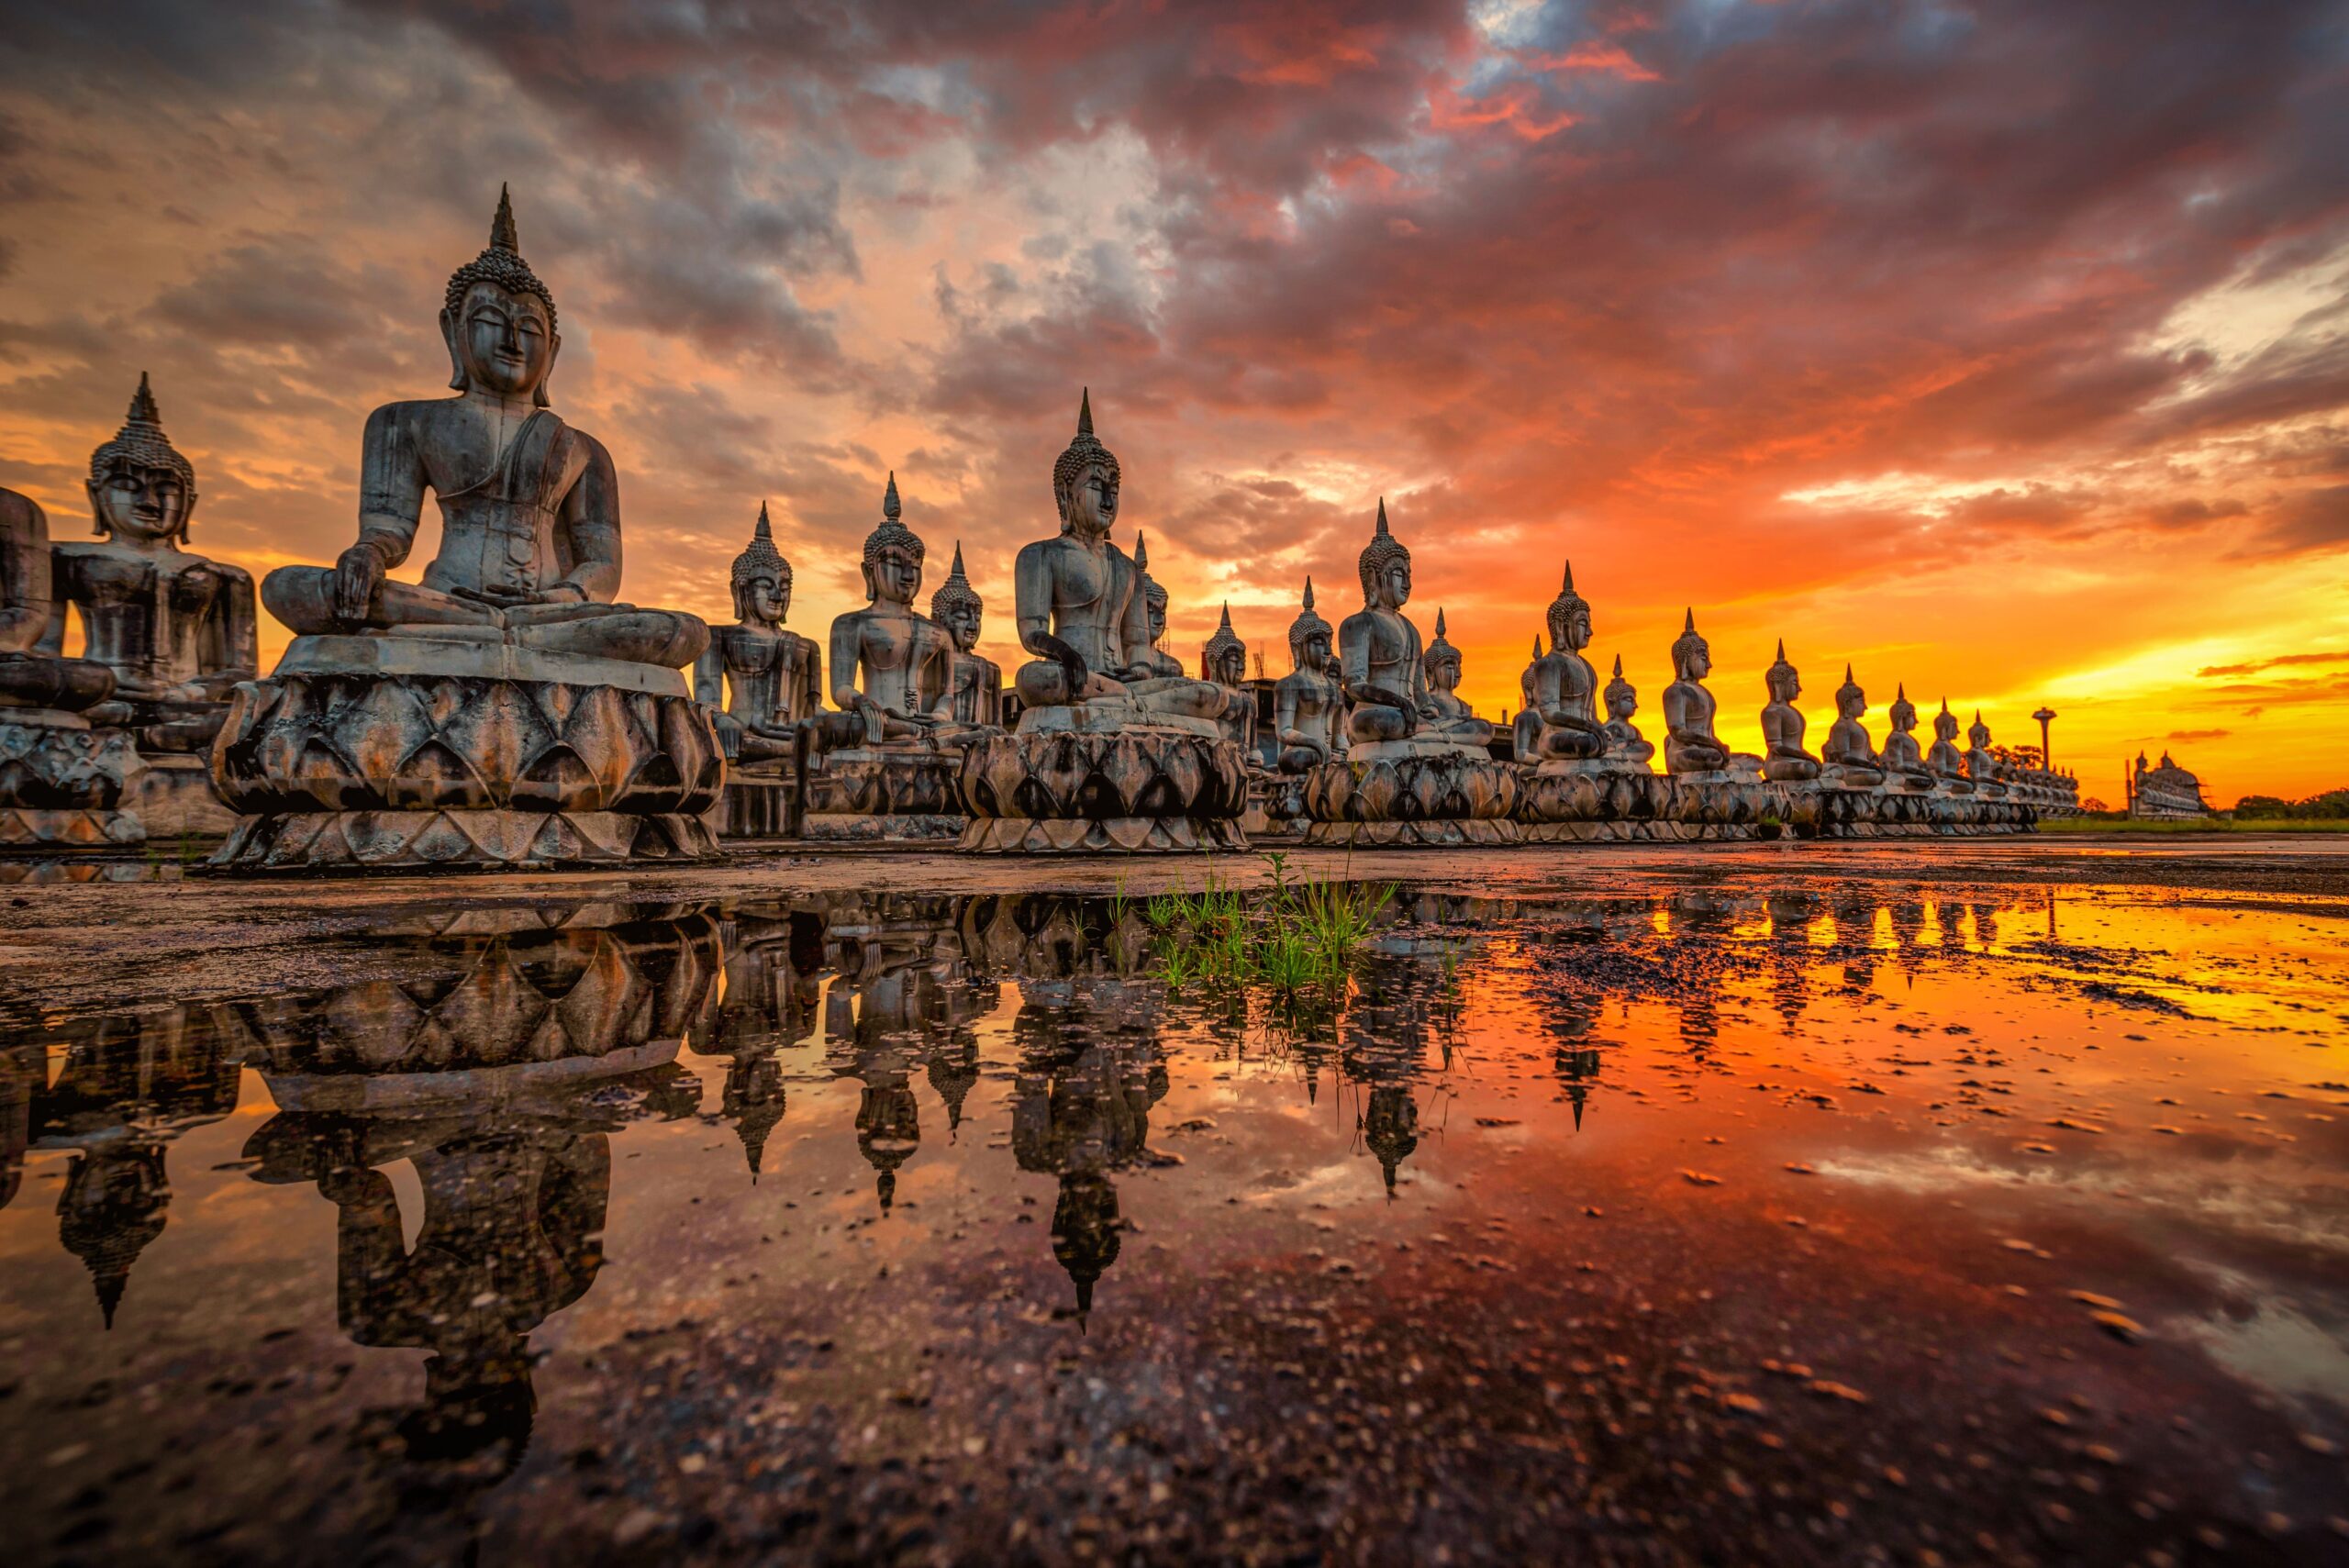 Buddha Temple in Thailand at Sunset